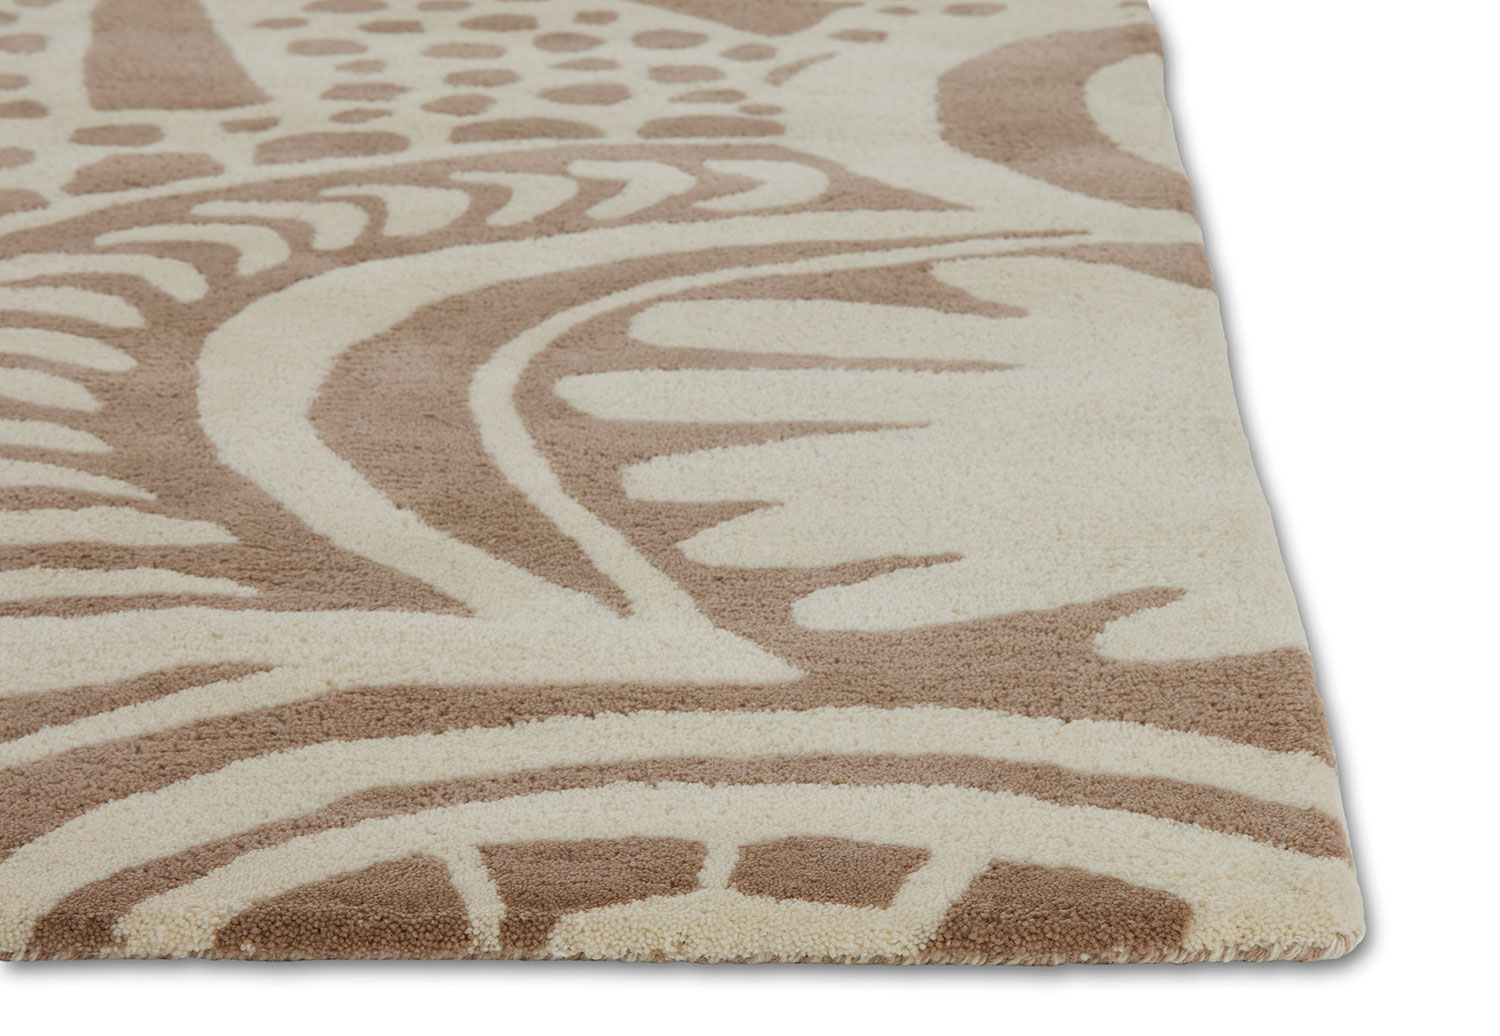 An alternate corner detail of a neutral colored, modern area rug called Storybook by Angela Adams